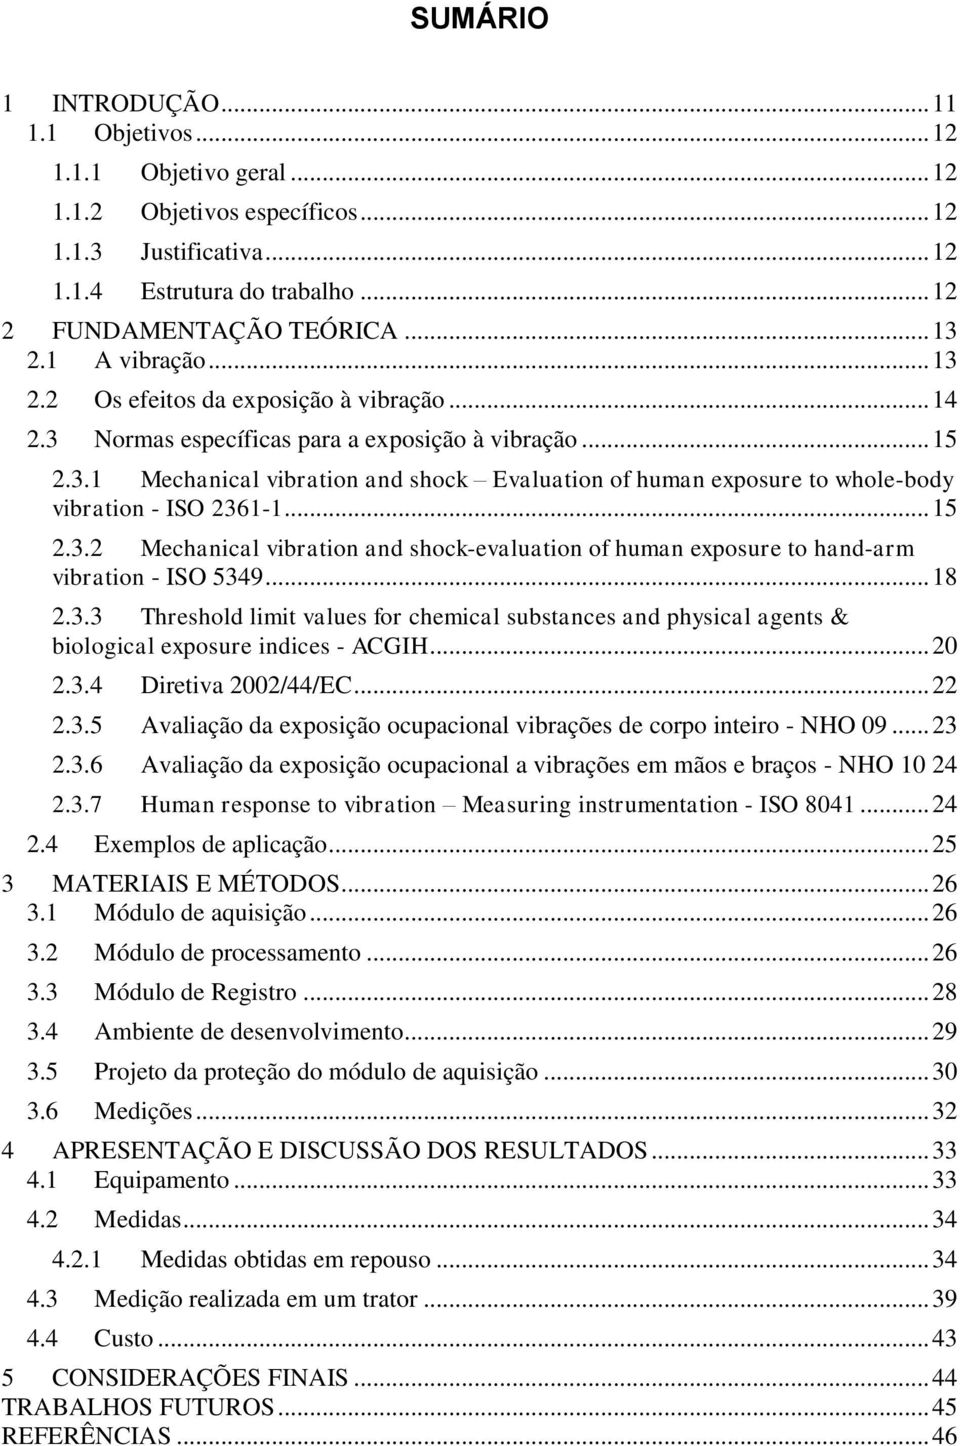 .. 15 2.3.2 Mechanical vibration and shock-evaluation of human exposure to hand-arm vibration - ISO 5349... 18 2.3.3 Threshold limit values for chemical substances and physical agents & biological exposure indices - ACGIH.